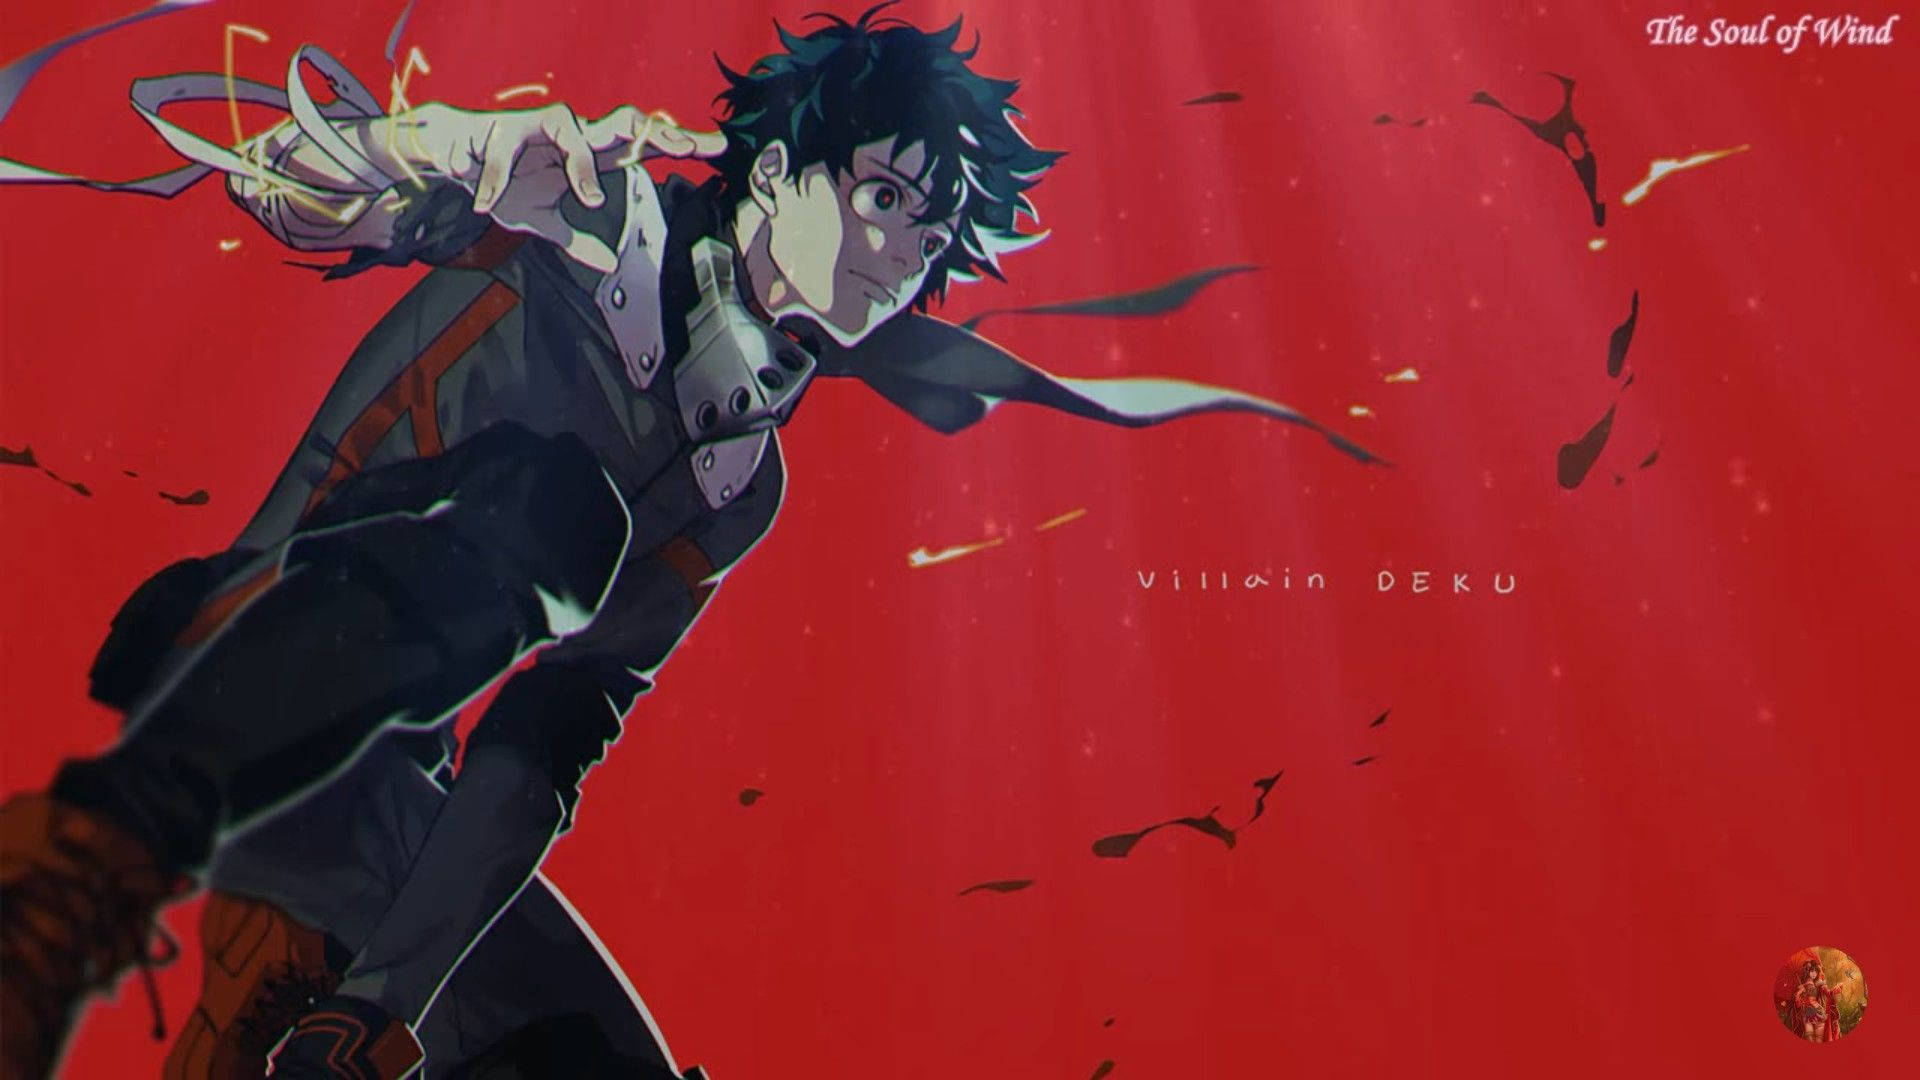 "Deku steps into the role as villain in My Hero Academia" Wallpaper